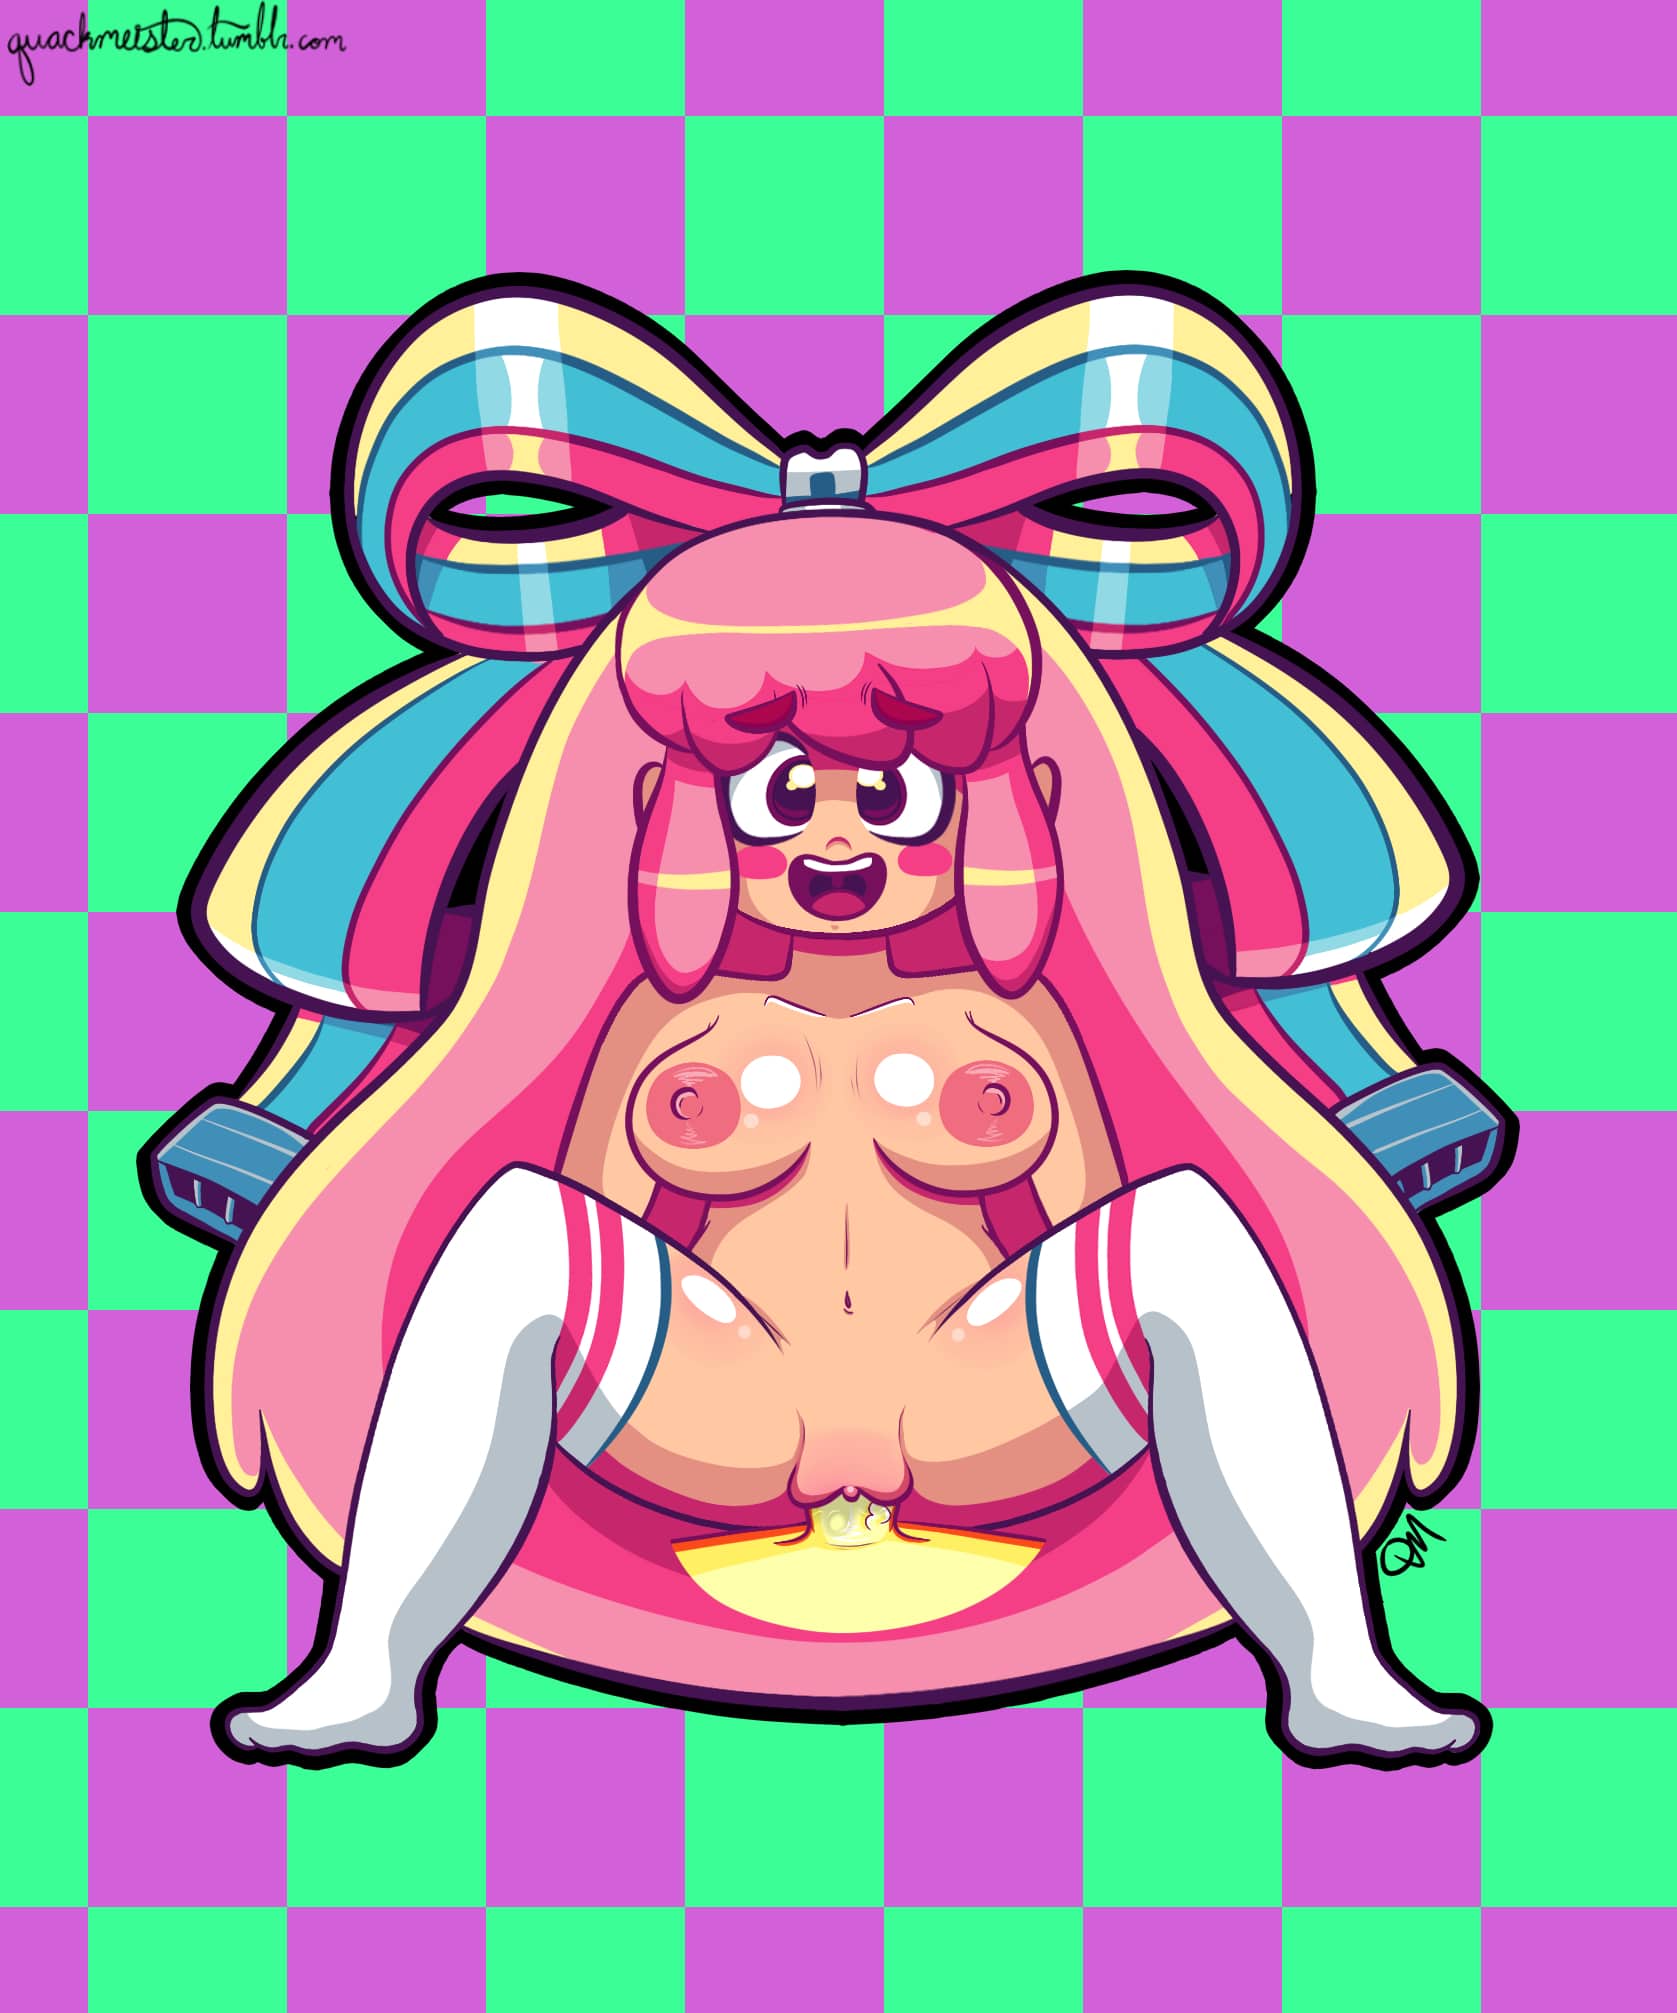 The crazy AI Giffany from. 